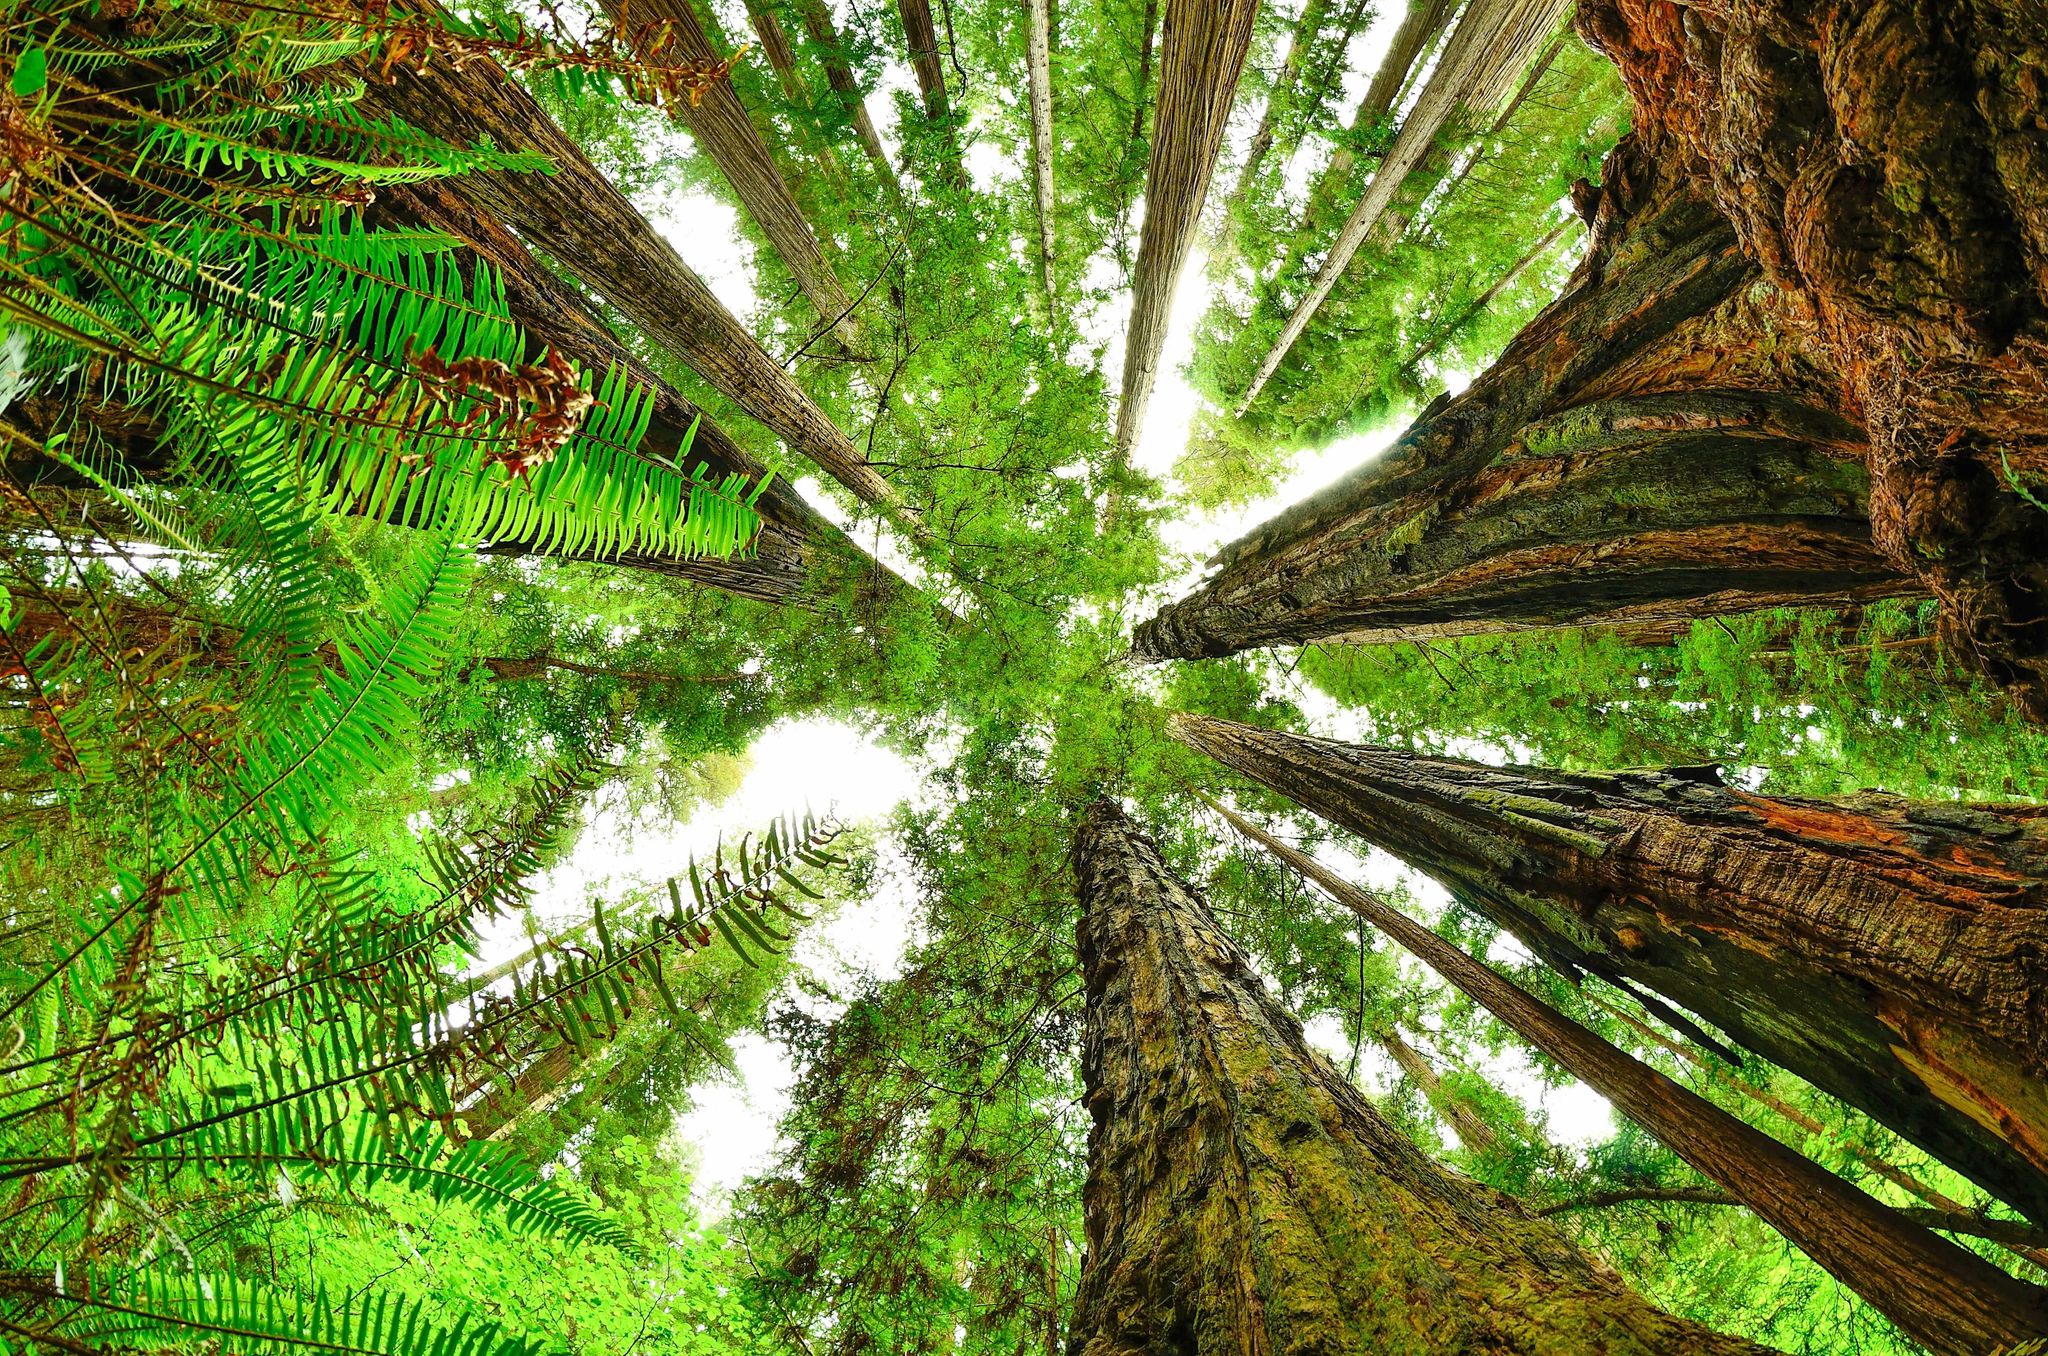 The redwood forest is a complicated and beautiful series of habitats.